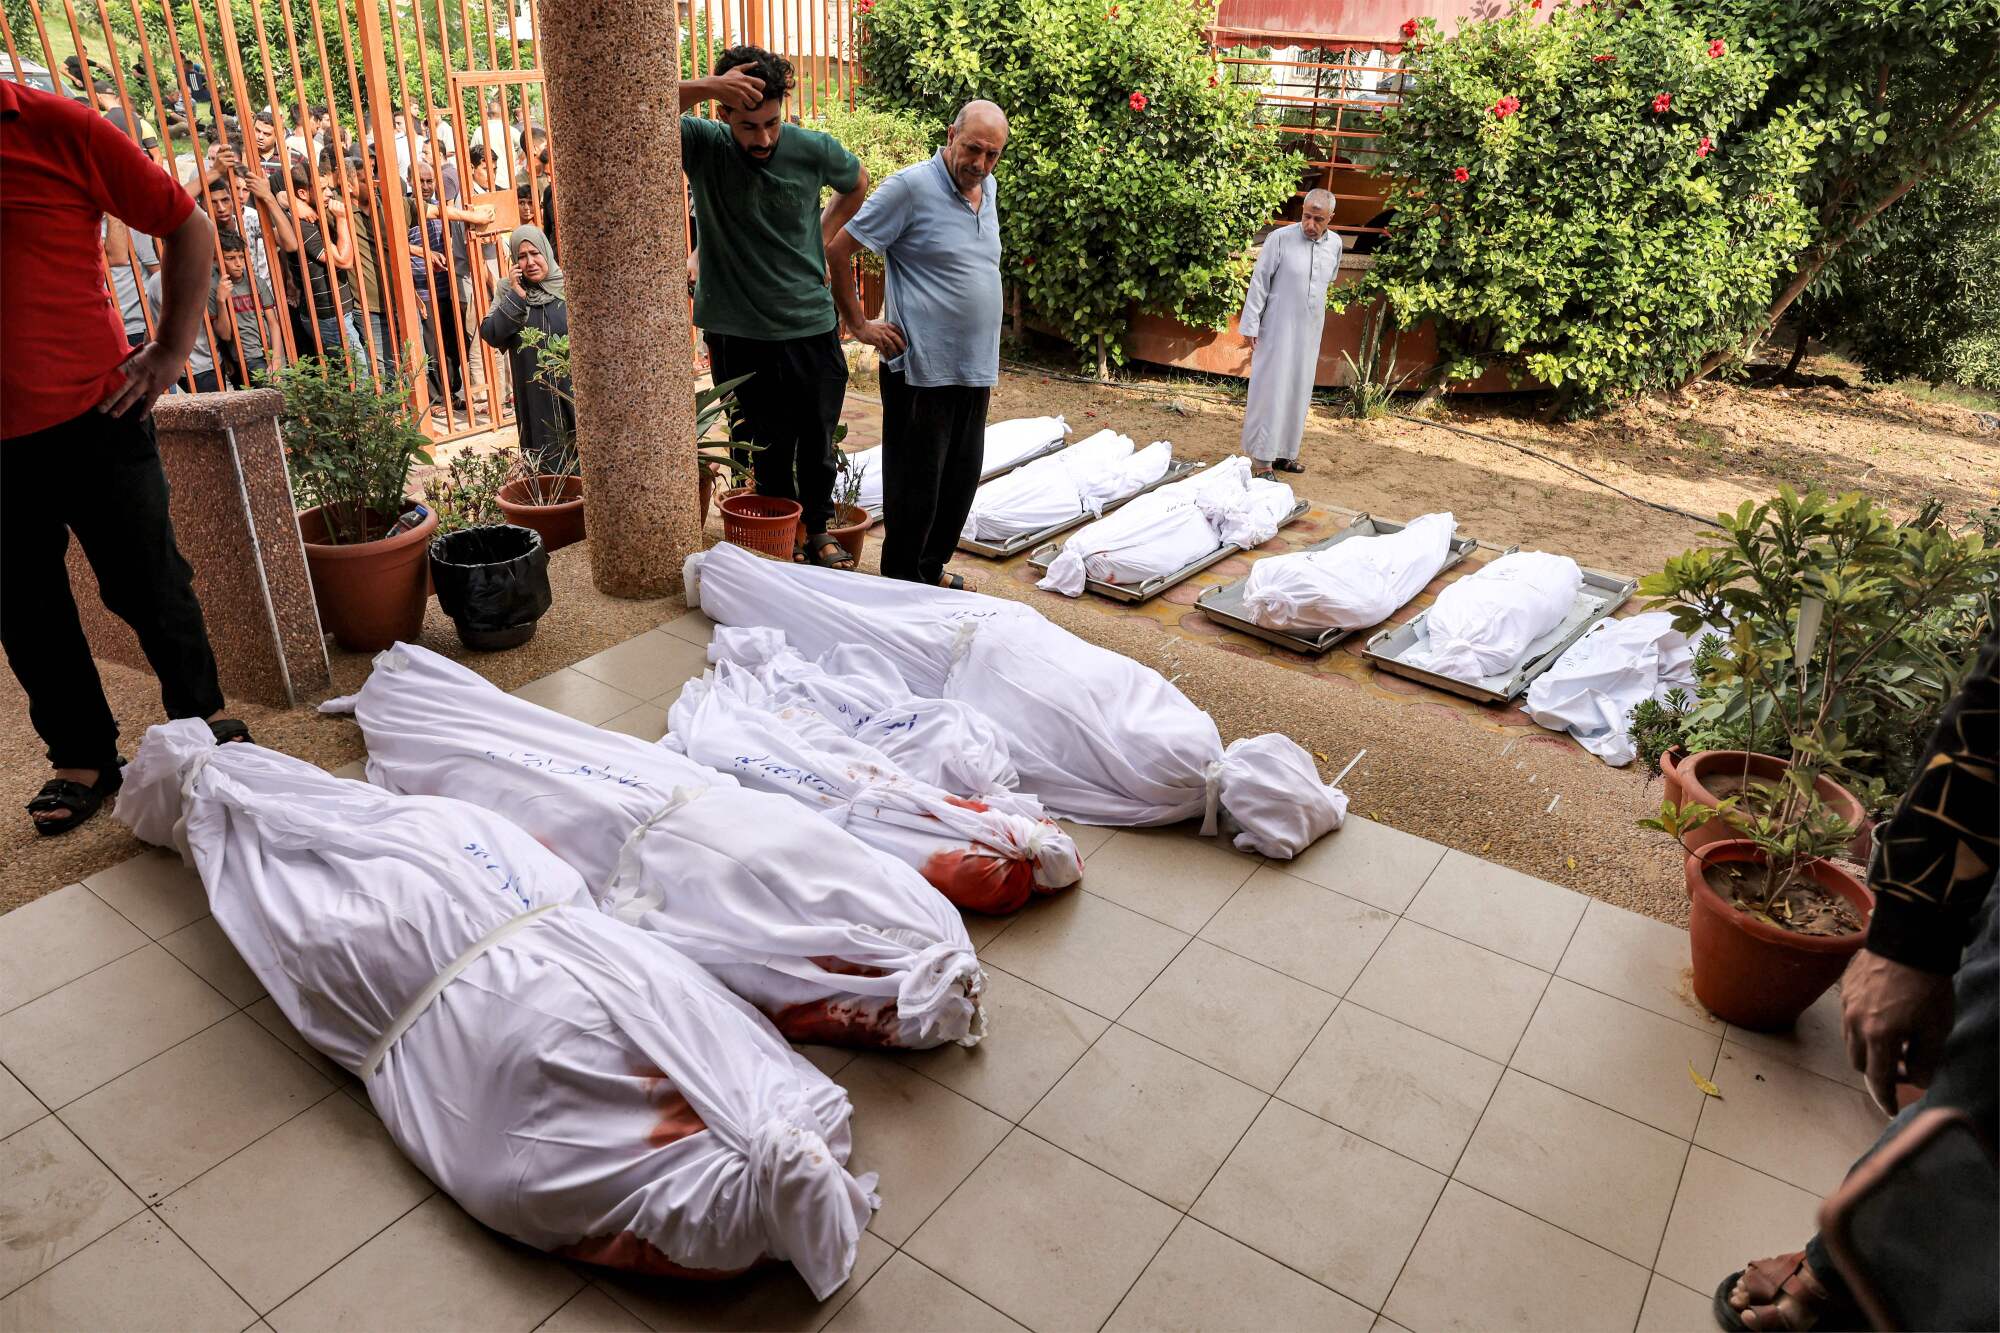 People gather at a morgue by the wrapped bodies of Palestinians killed in an Israeli airstrike.